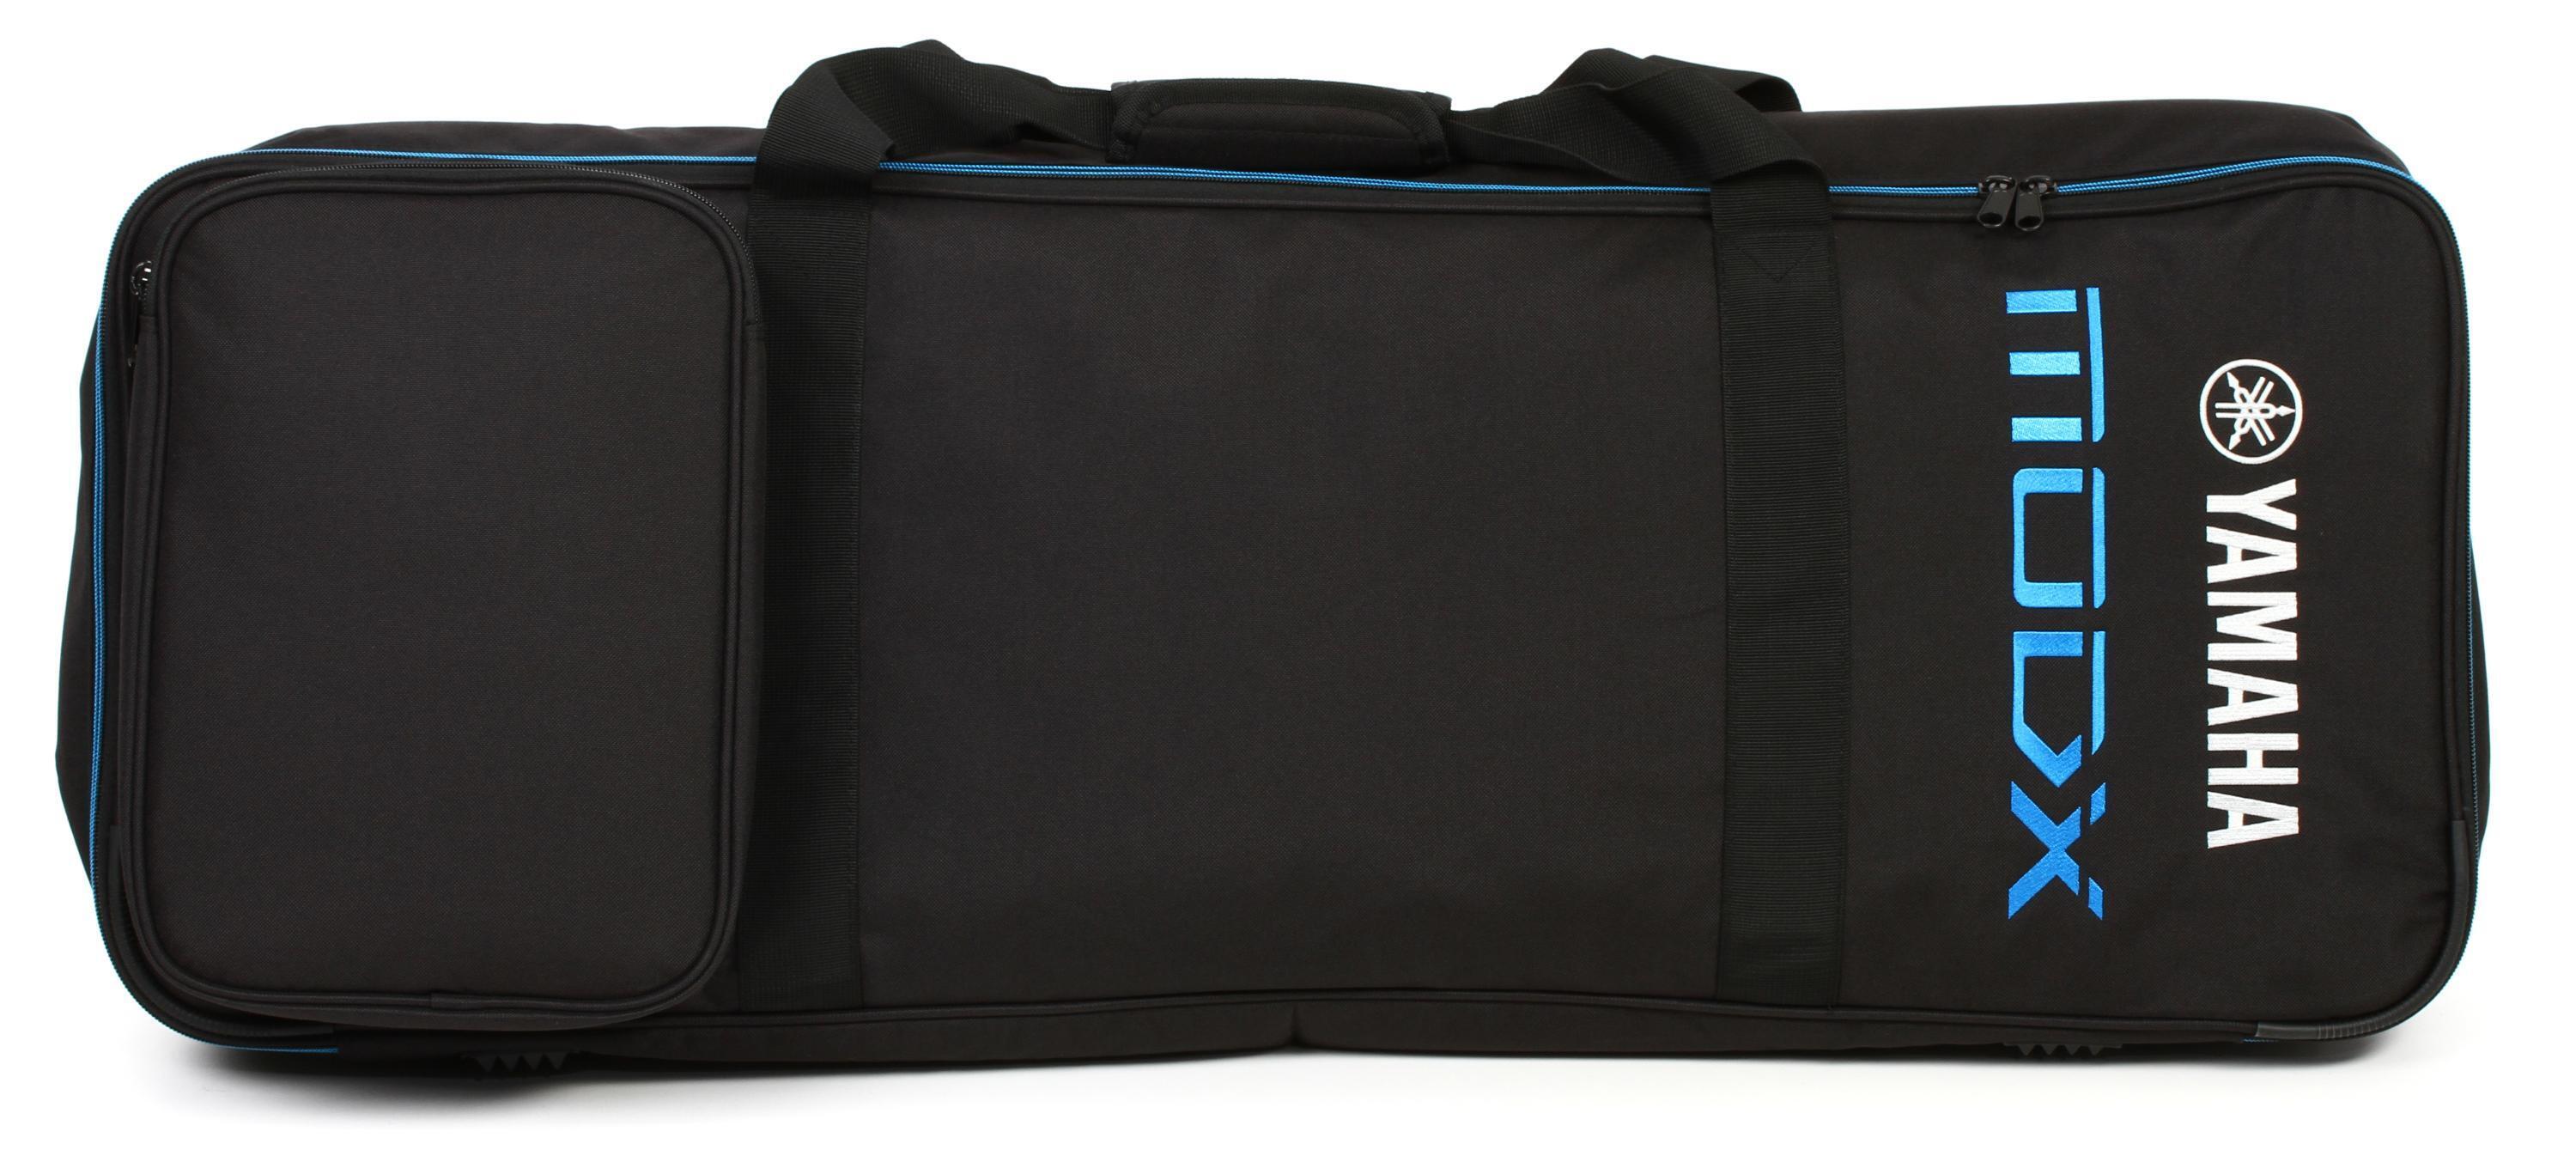 Console bag original Yamaha | RWN-Moto.com | Motorcycle accessories,  Motorcycle Tuning, spare parts, clothing and helmets